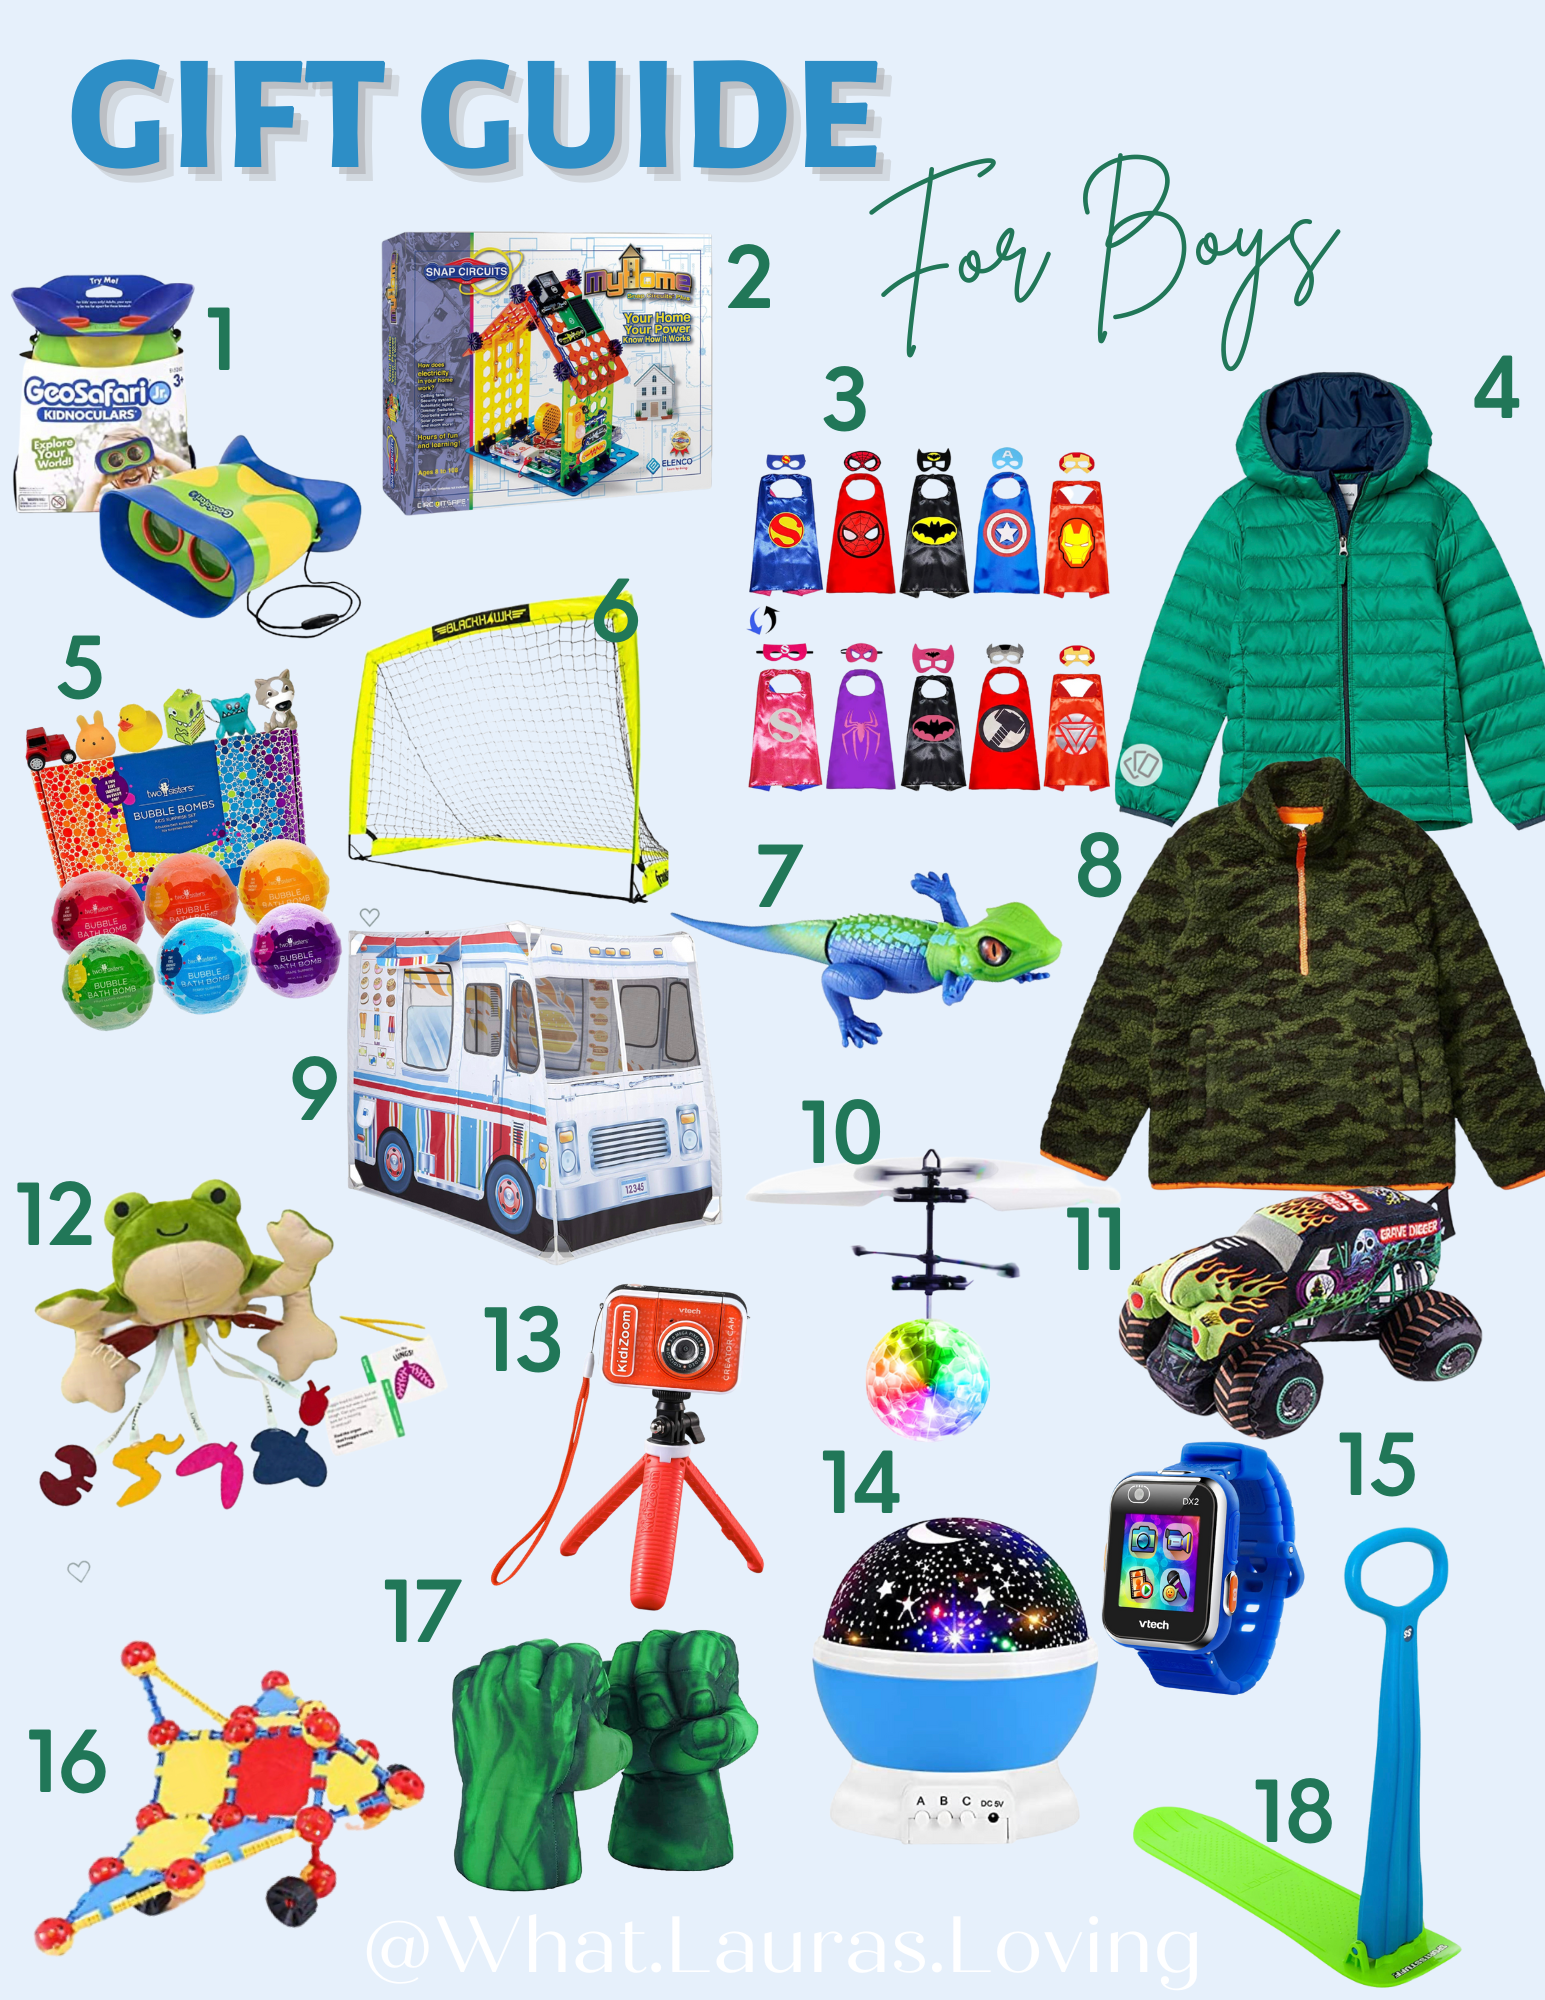 Gift Ideas for Families with Kids - The Joys of Boys